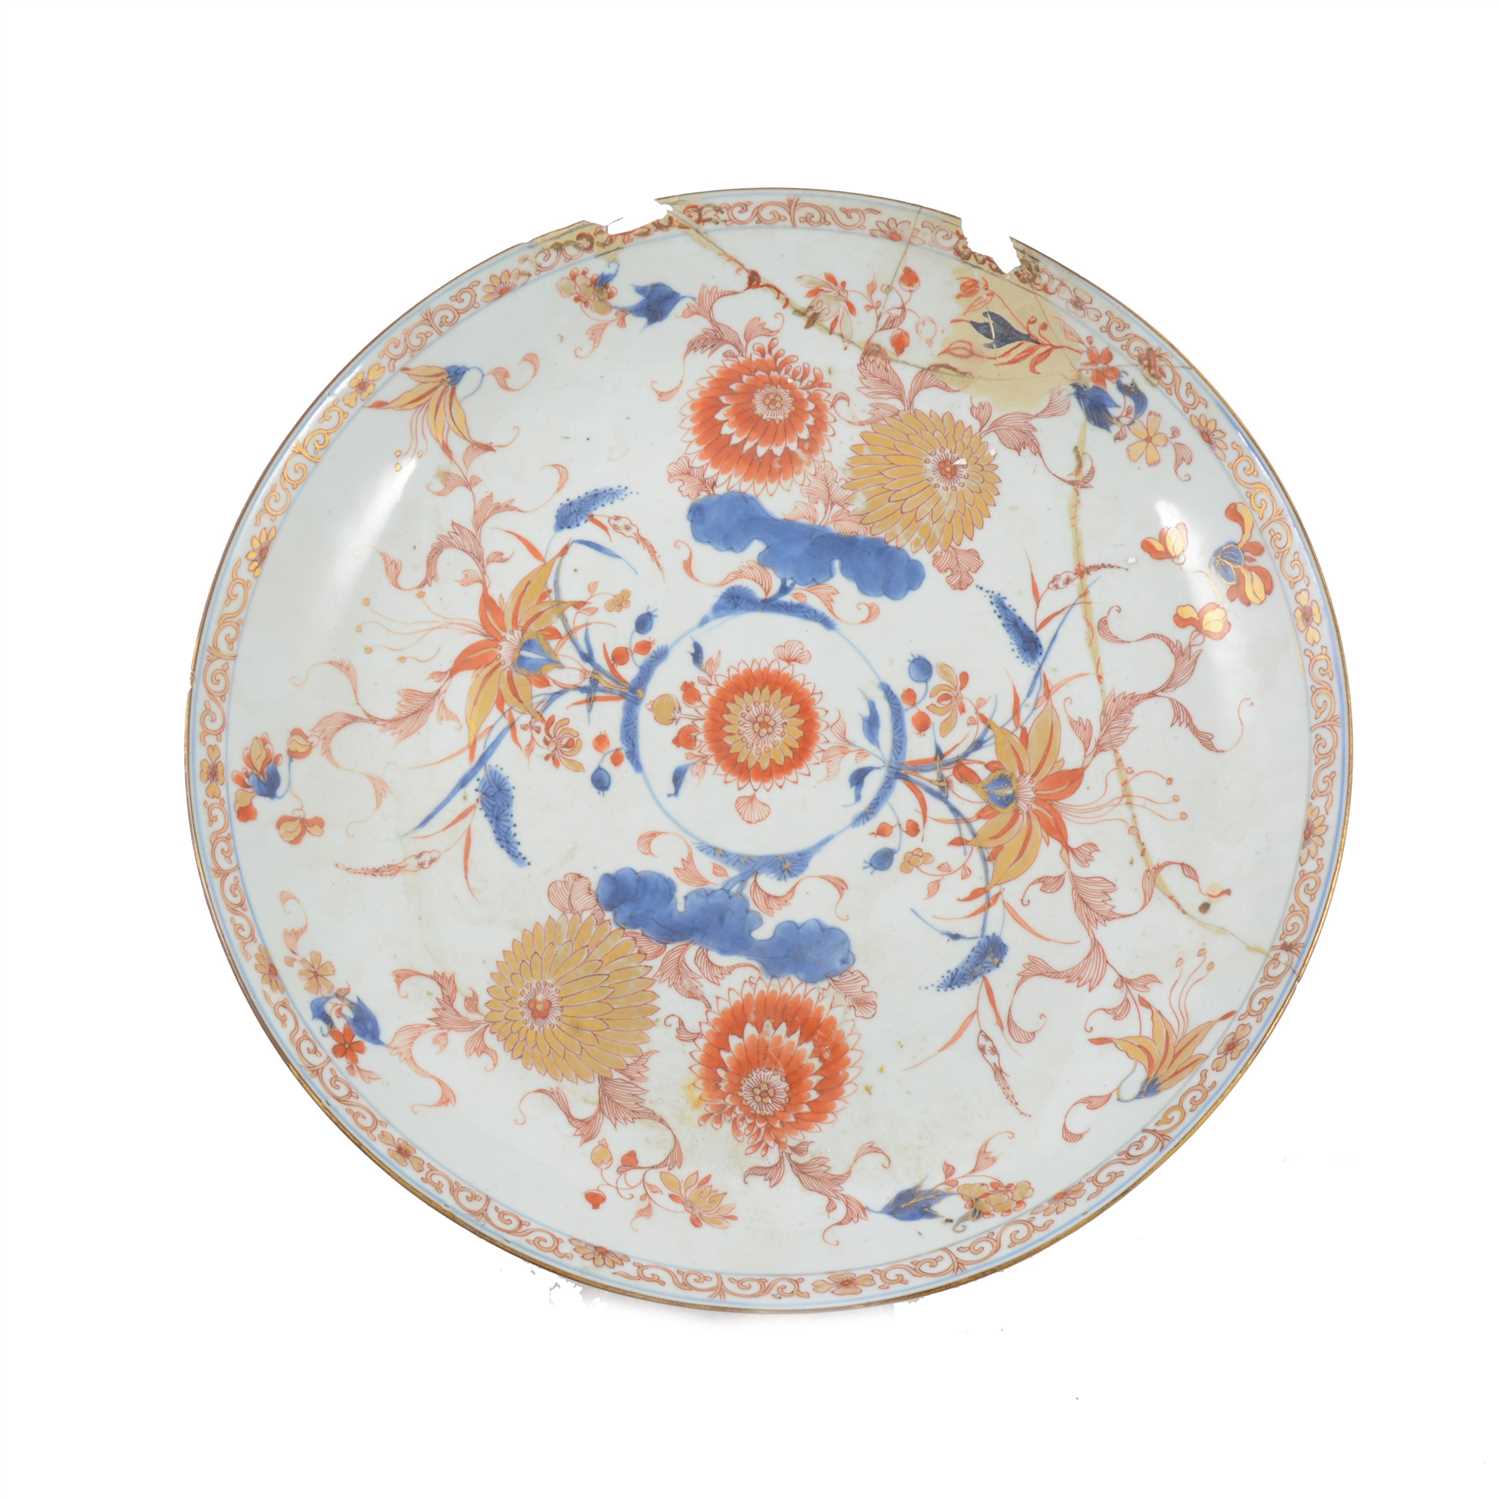 Lot 80 - A Chinese porcelain charger, probably Qianlong